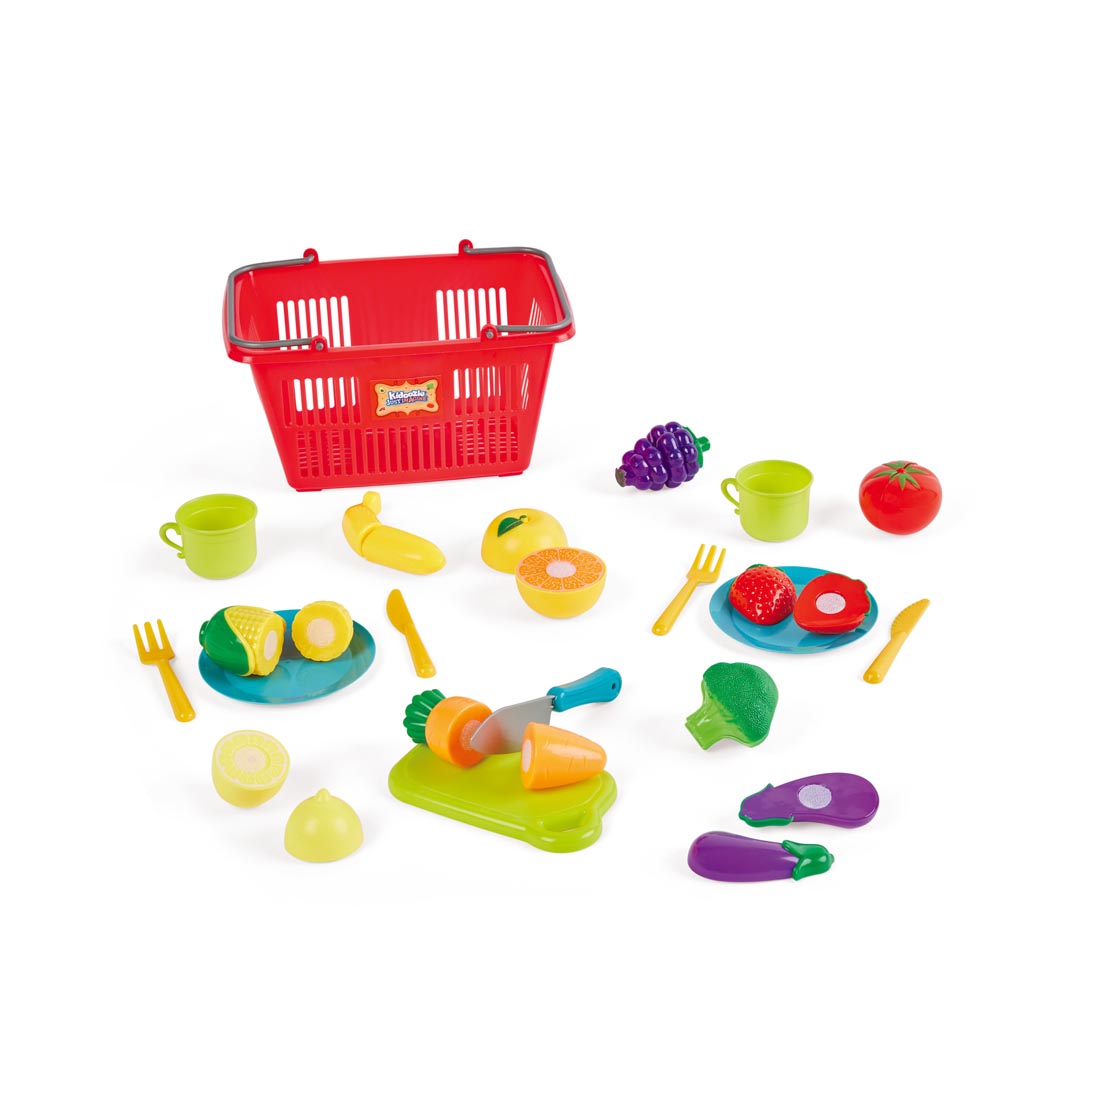 contents of the Slice 'N Play Shopping Set By Kidoozie